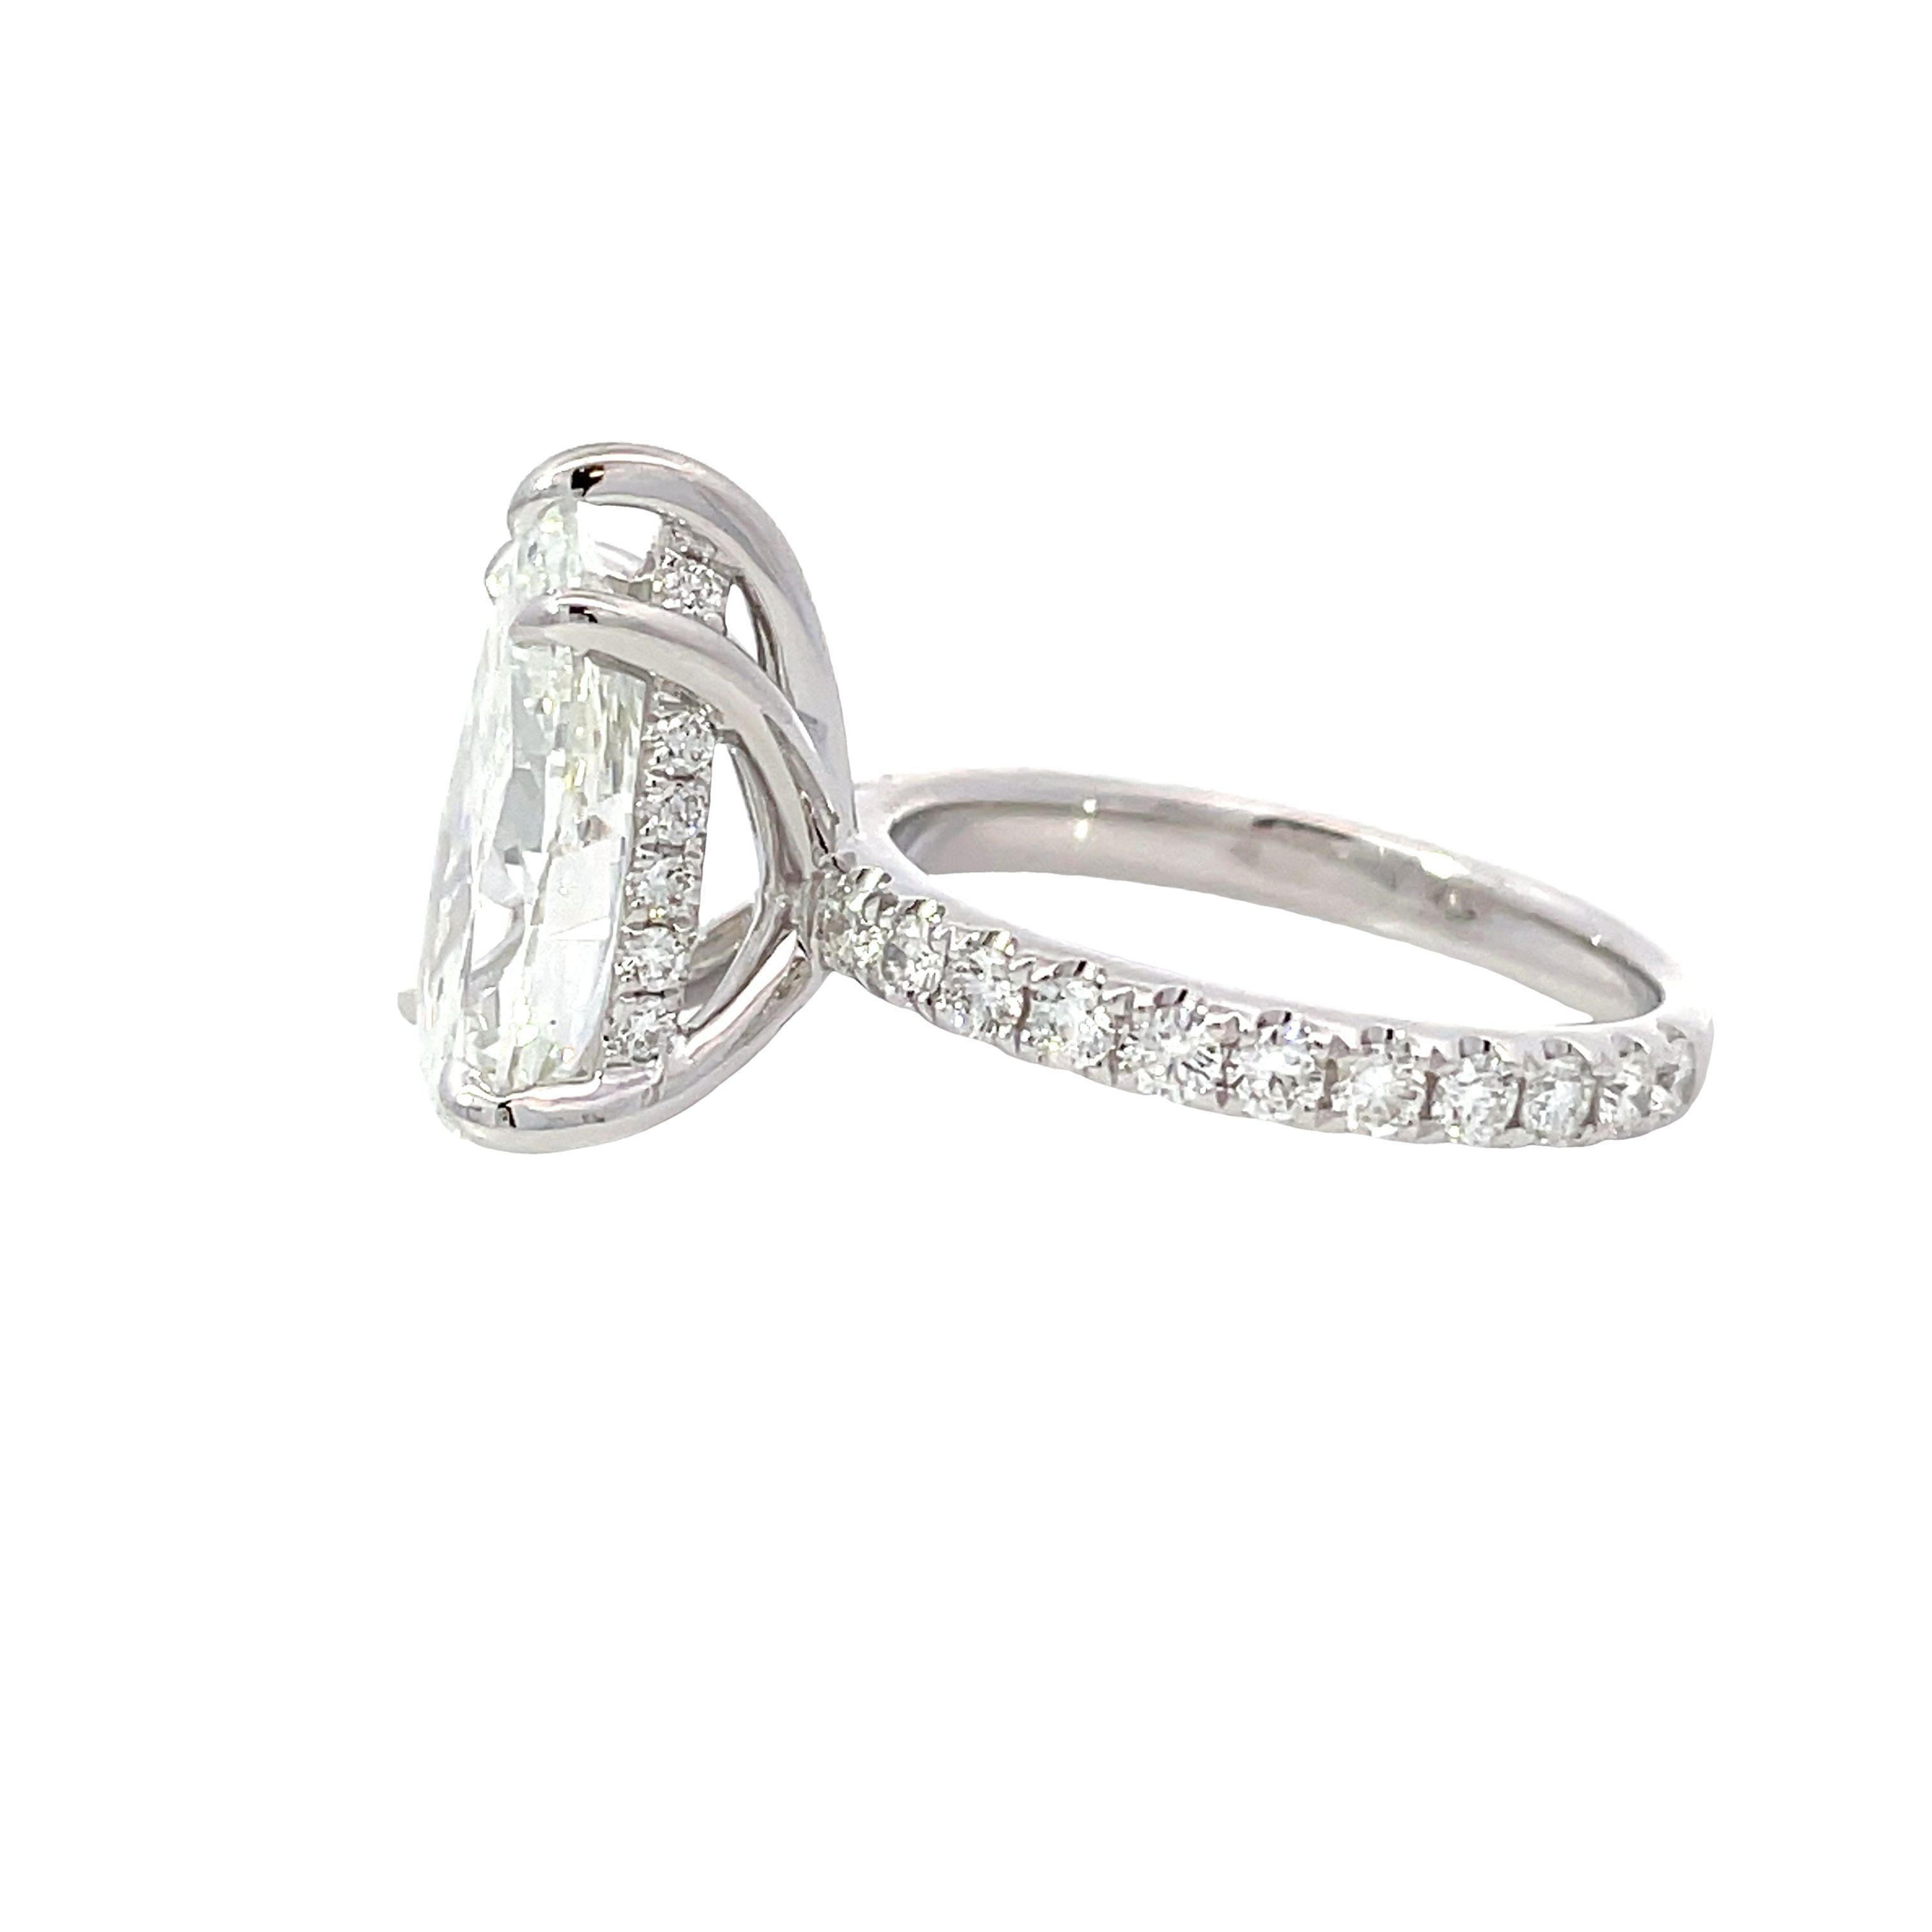 Gia certified 5.03ct H-VS1 white Diamond Bridal ring In New Condition For Sale In New York, NY